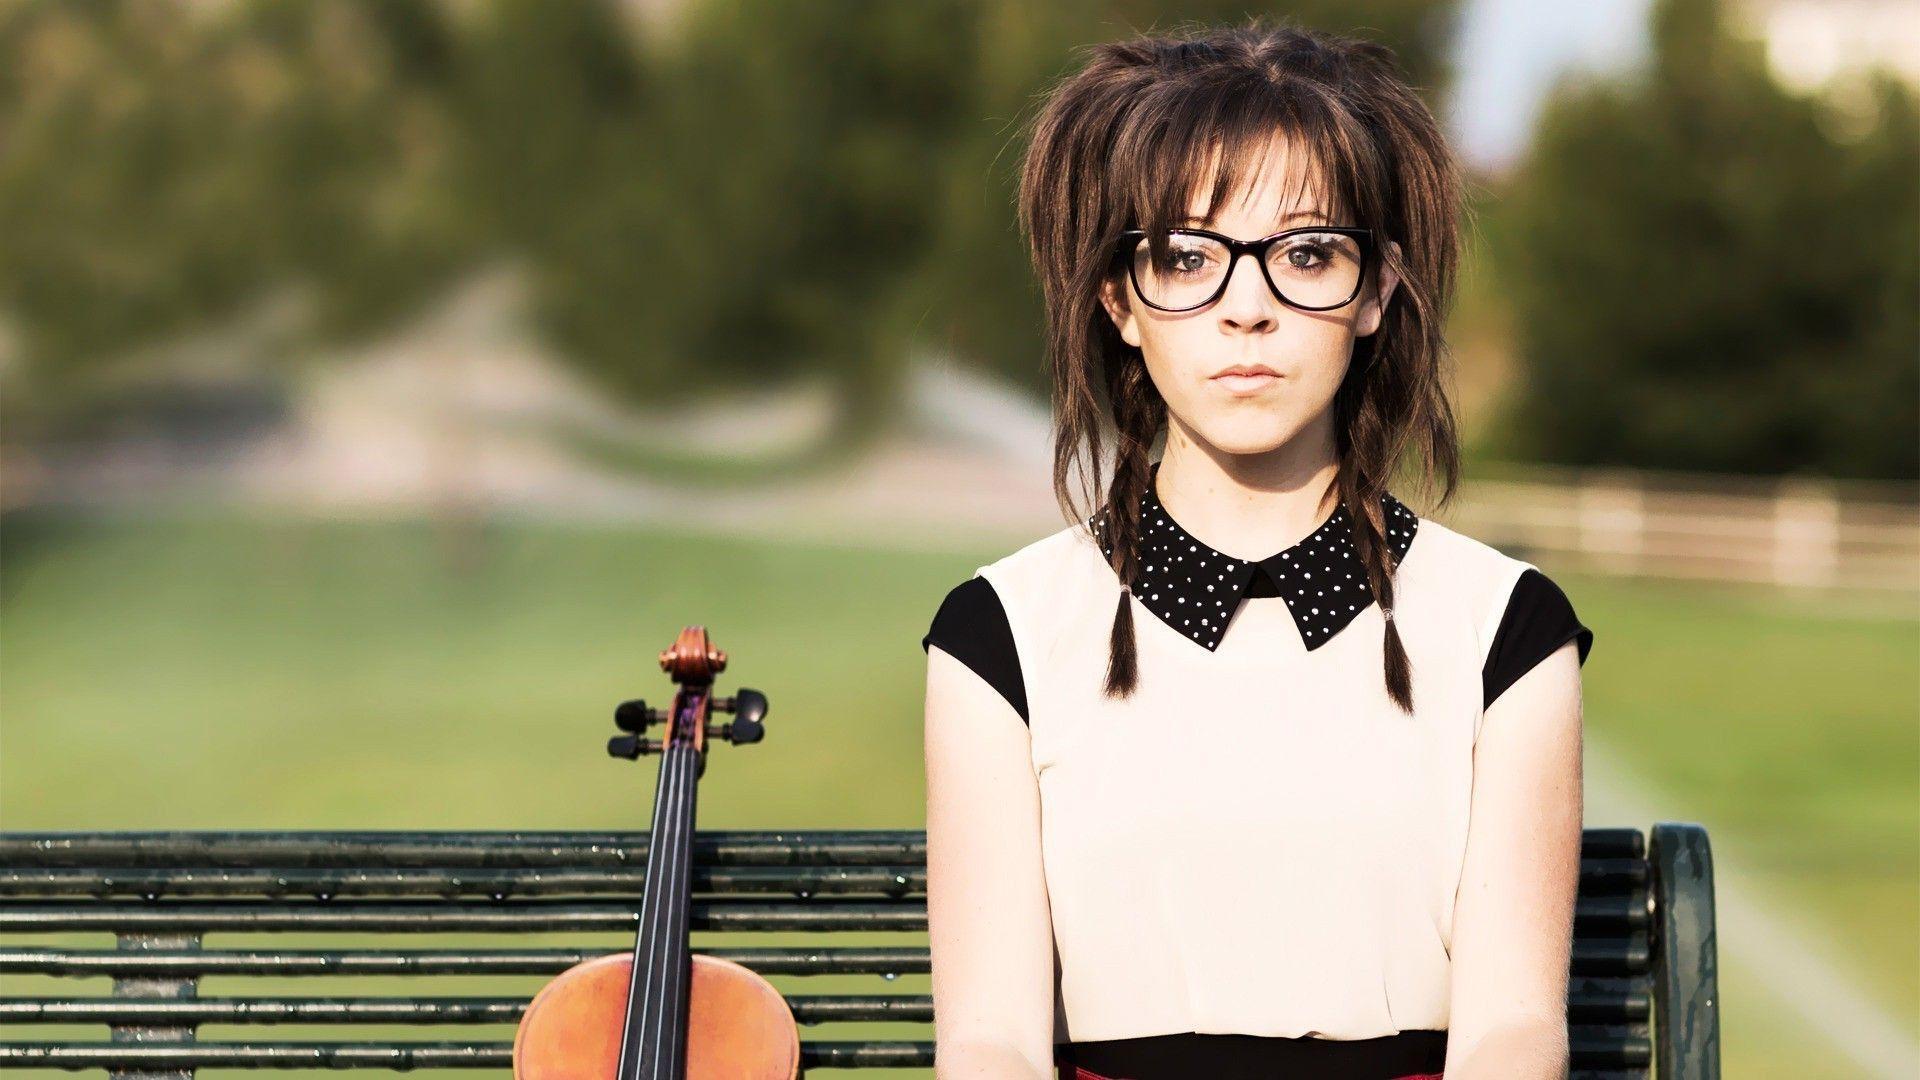 Cute Lindsey Stirling Wallpaper 22676 1920x1080 px